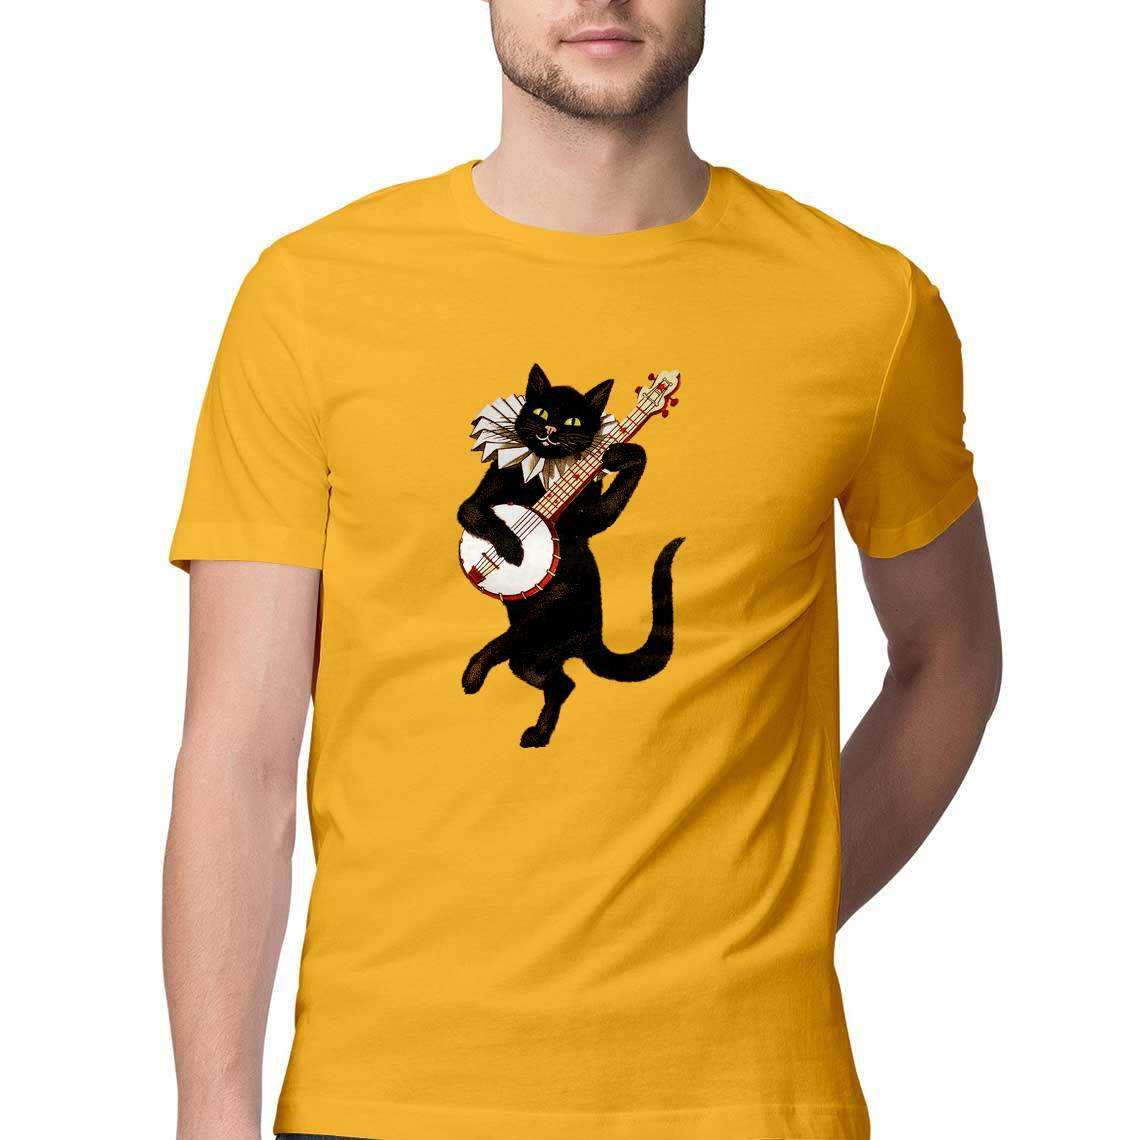 Mr. Whisker's playing the Banjo Men's Graphic T-Shirt - CBD Store India